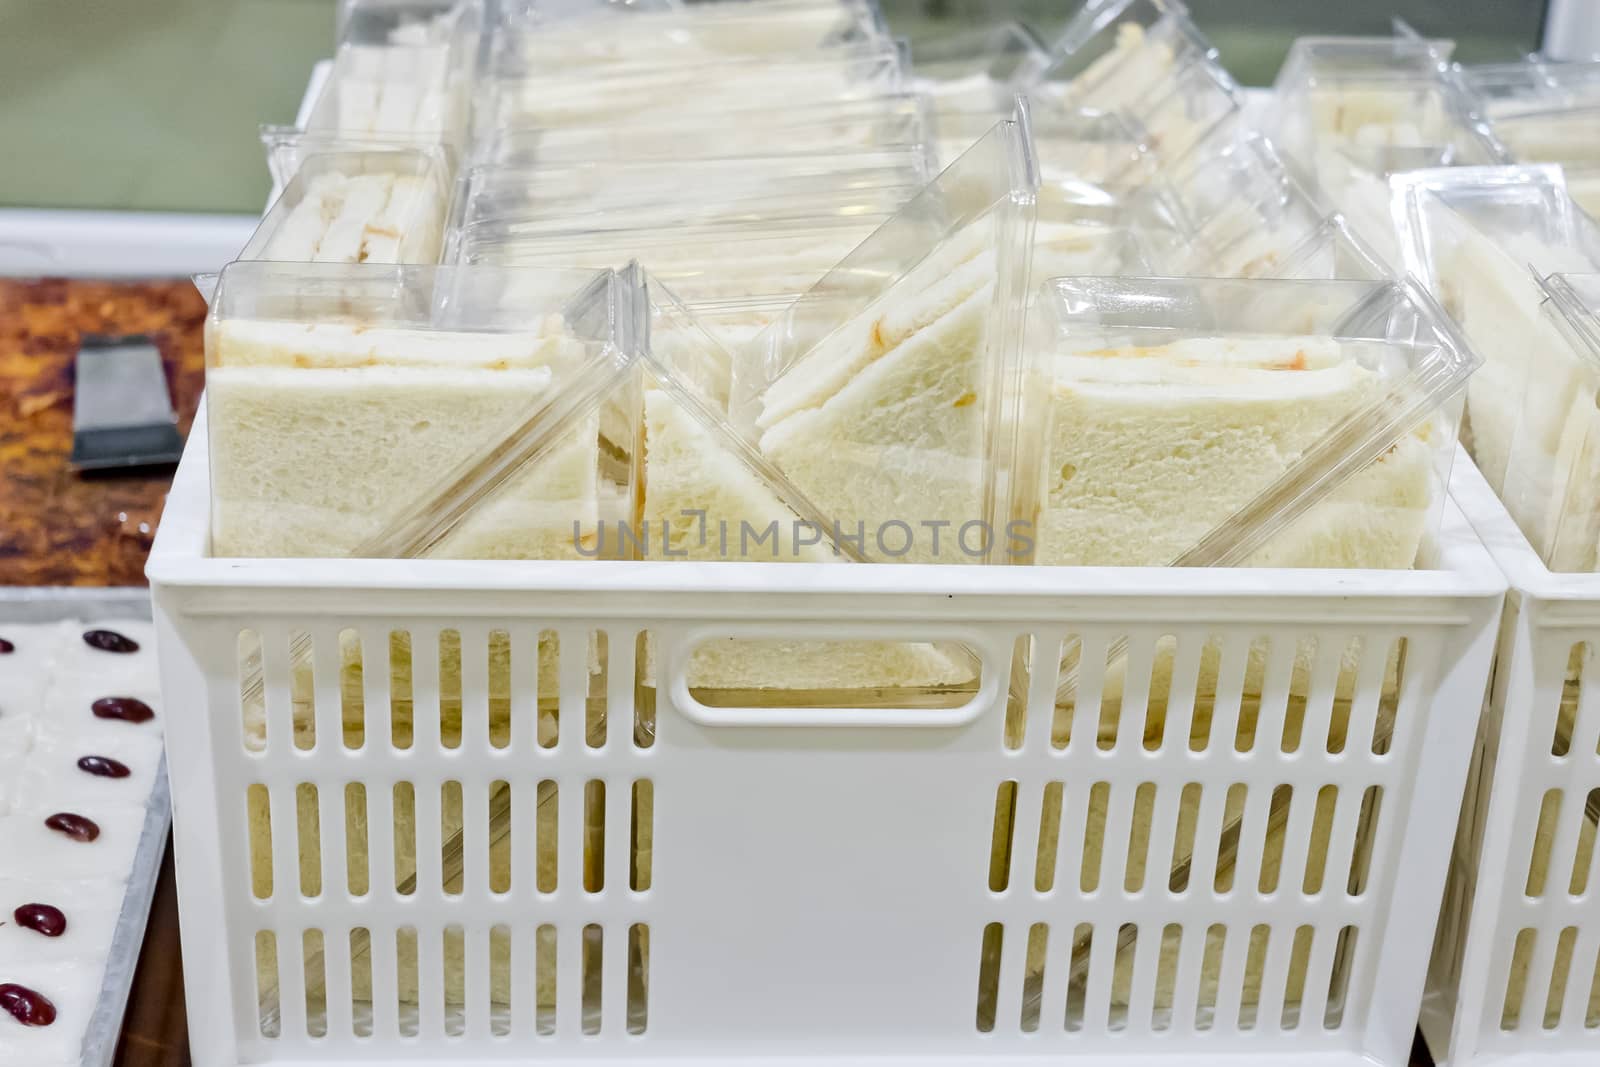 Cut platter of sandwich triangles in plastic box ready for sell by art9858